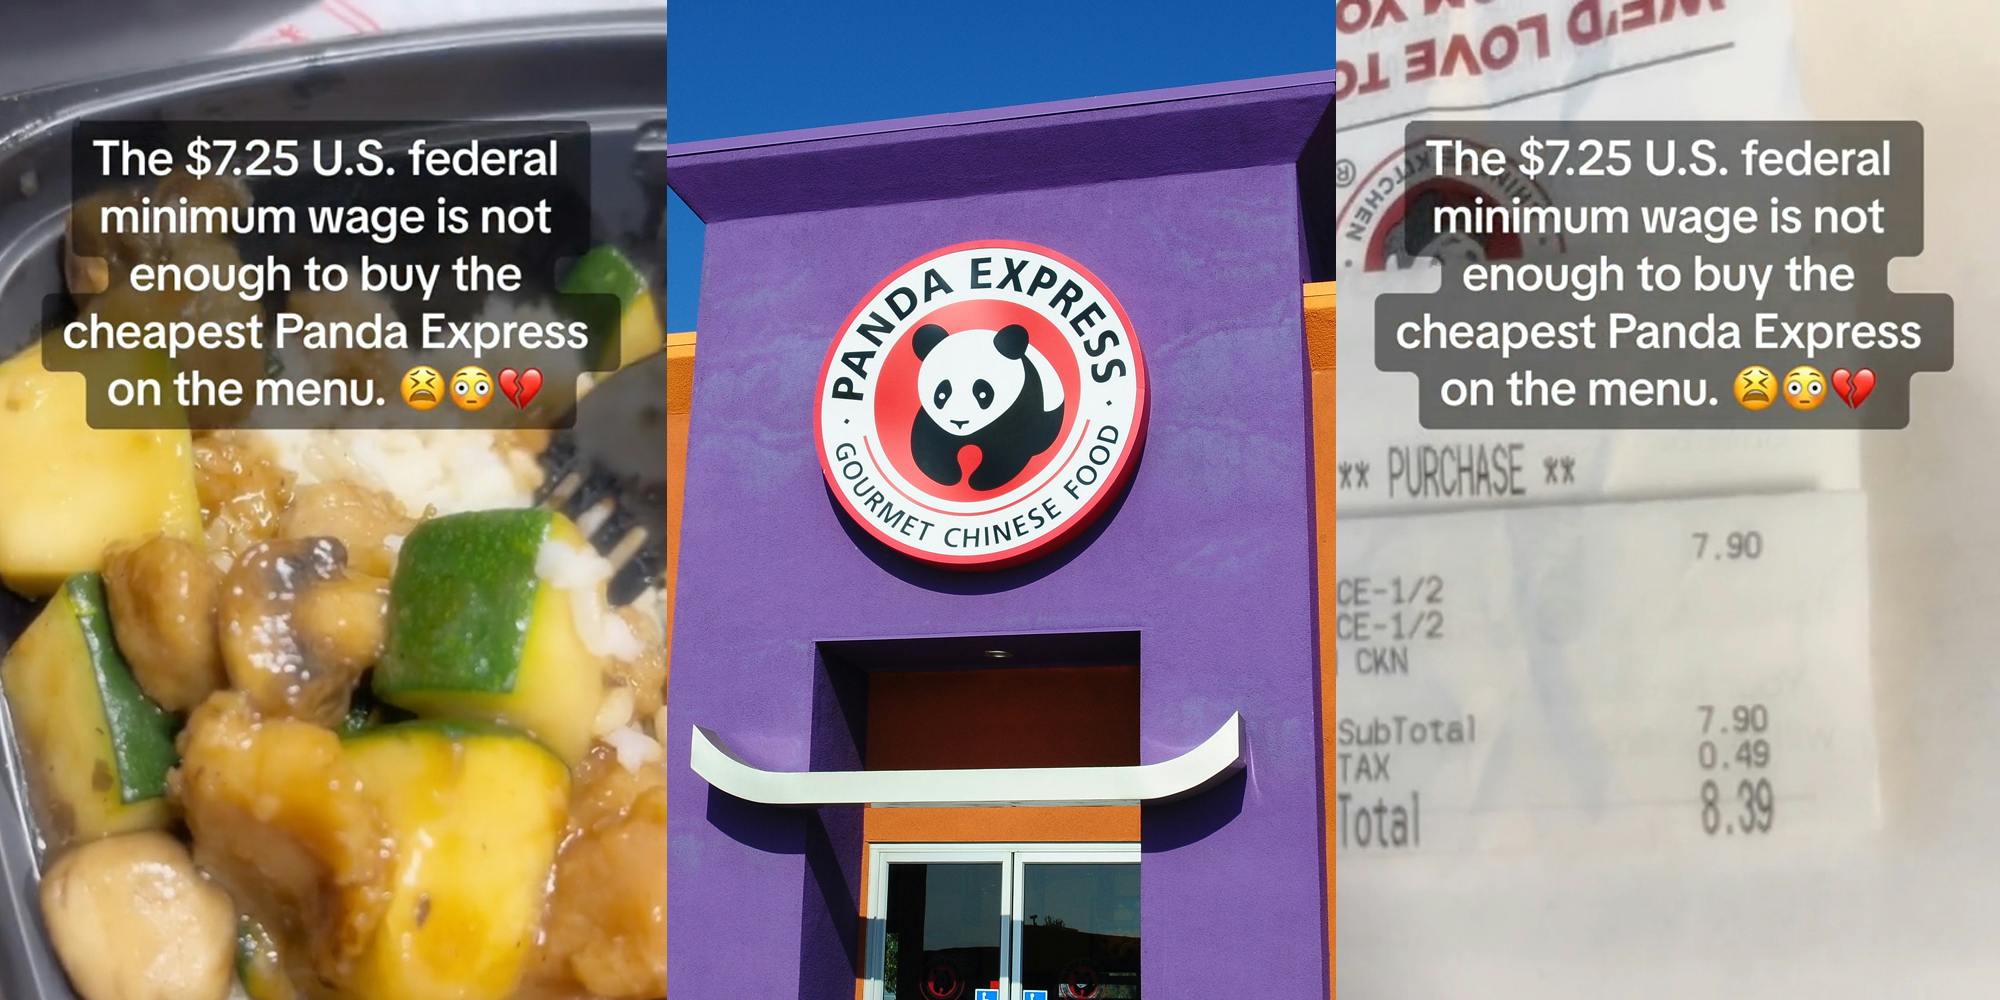 Panda Express food with caption "The $7.25 U.S. federal minimum wage is not enough to buy the cheapest Panda Express on the menu." (l) Panda express building with sign (c) Panda Express receipt with caption "The $7.25 U.S. federal minimum wage is not enough to buy the cheapest Panda Express on the menu." (r)